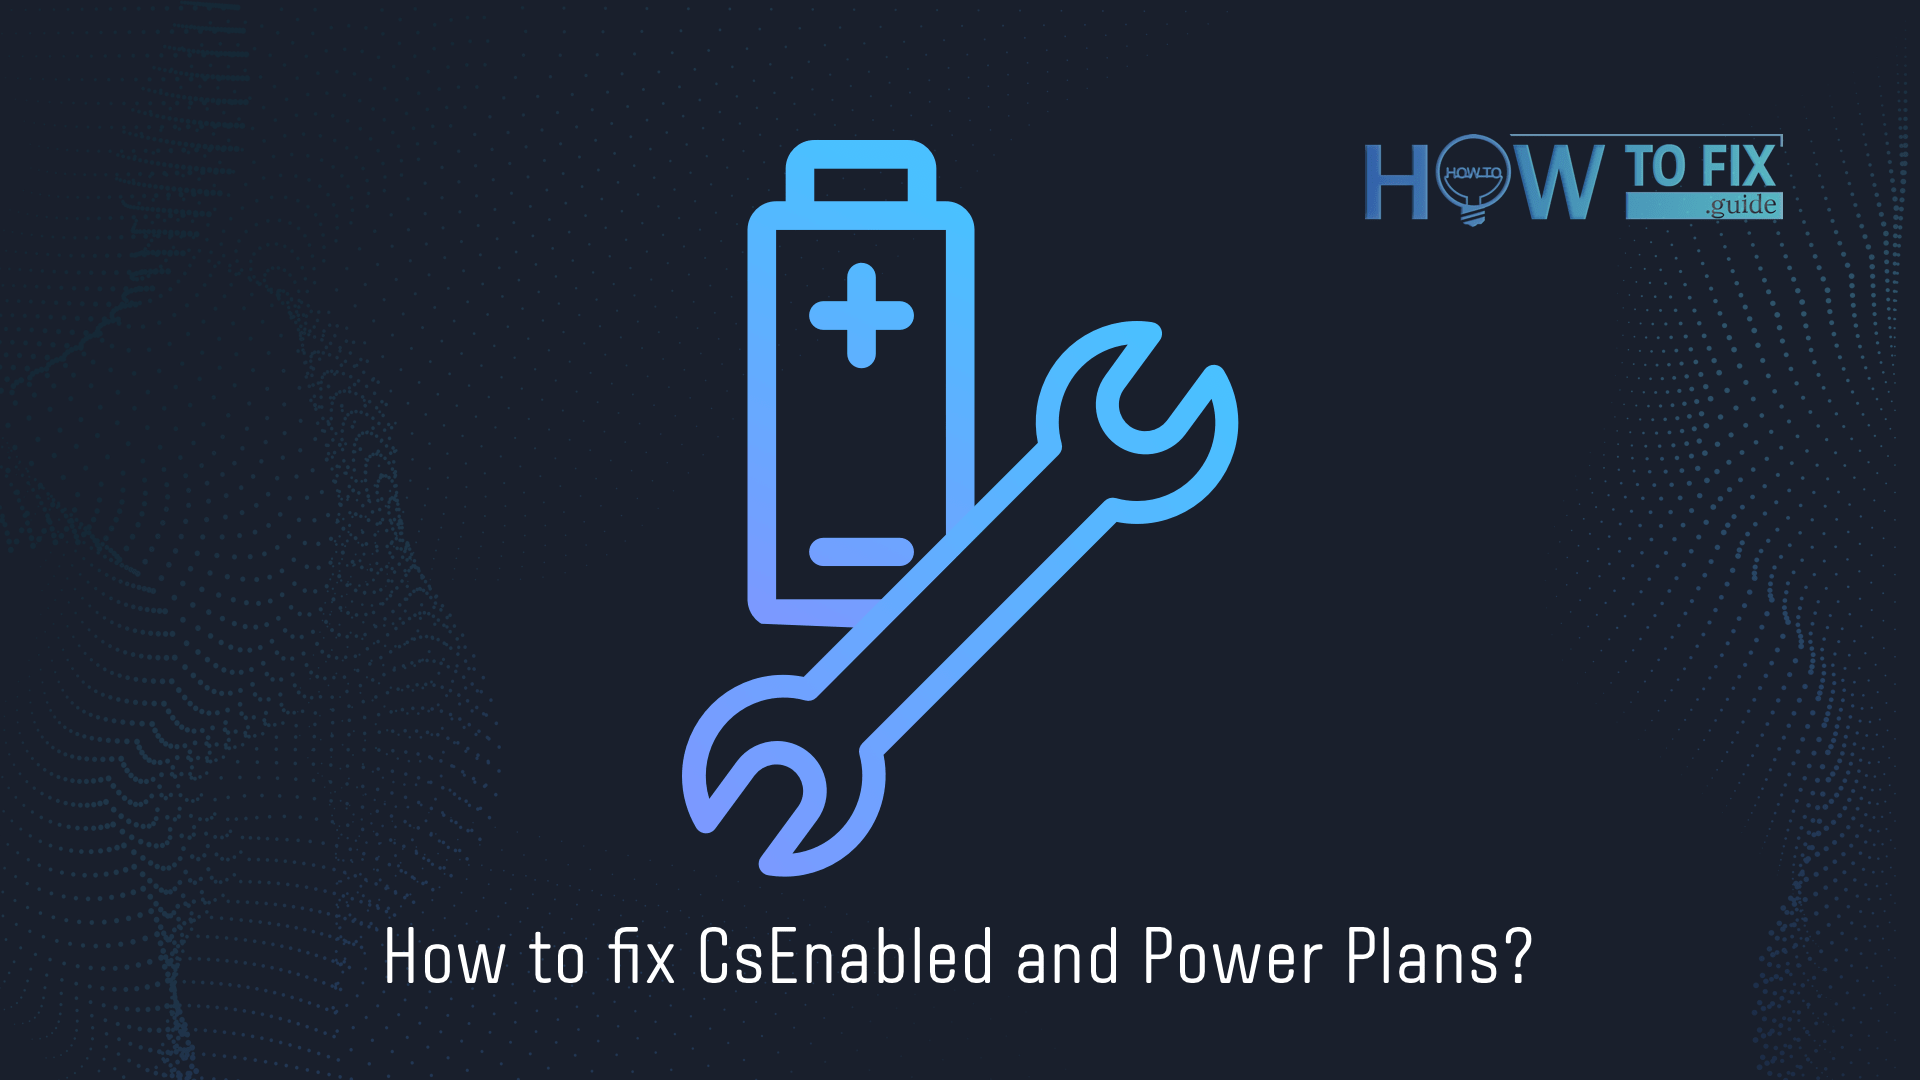 Fixing the CsEnabled option and Power Plans